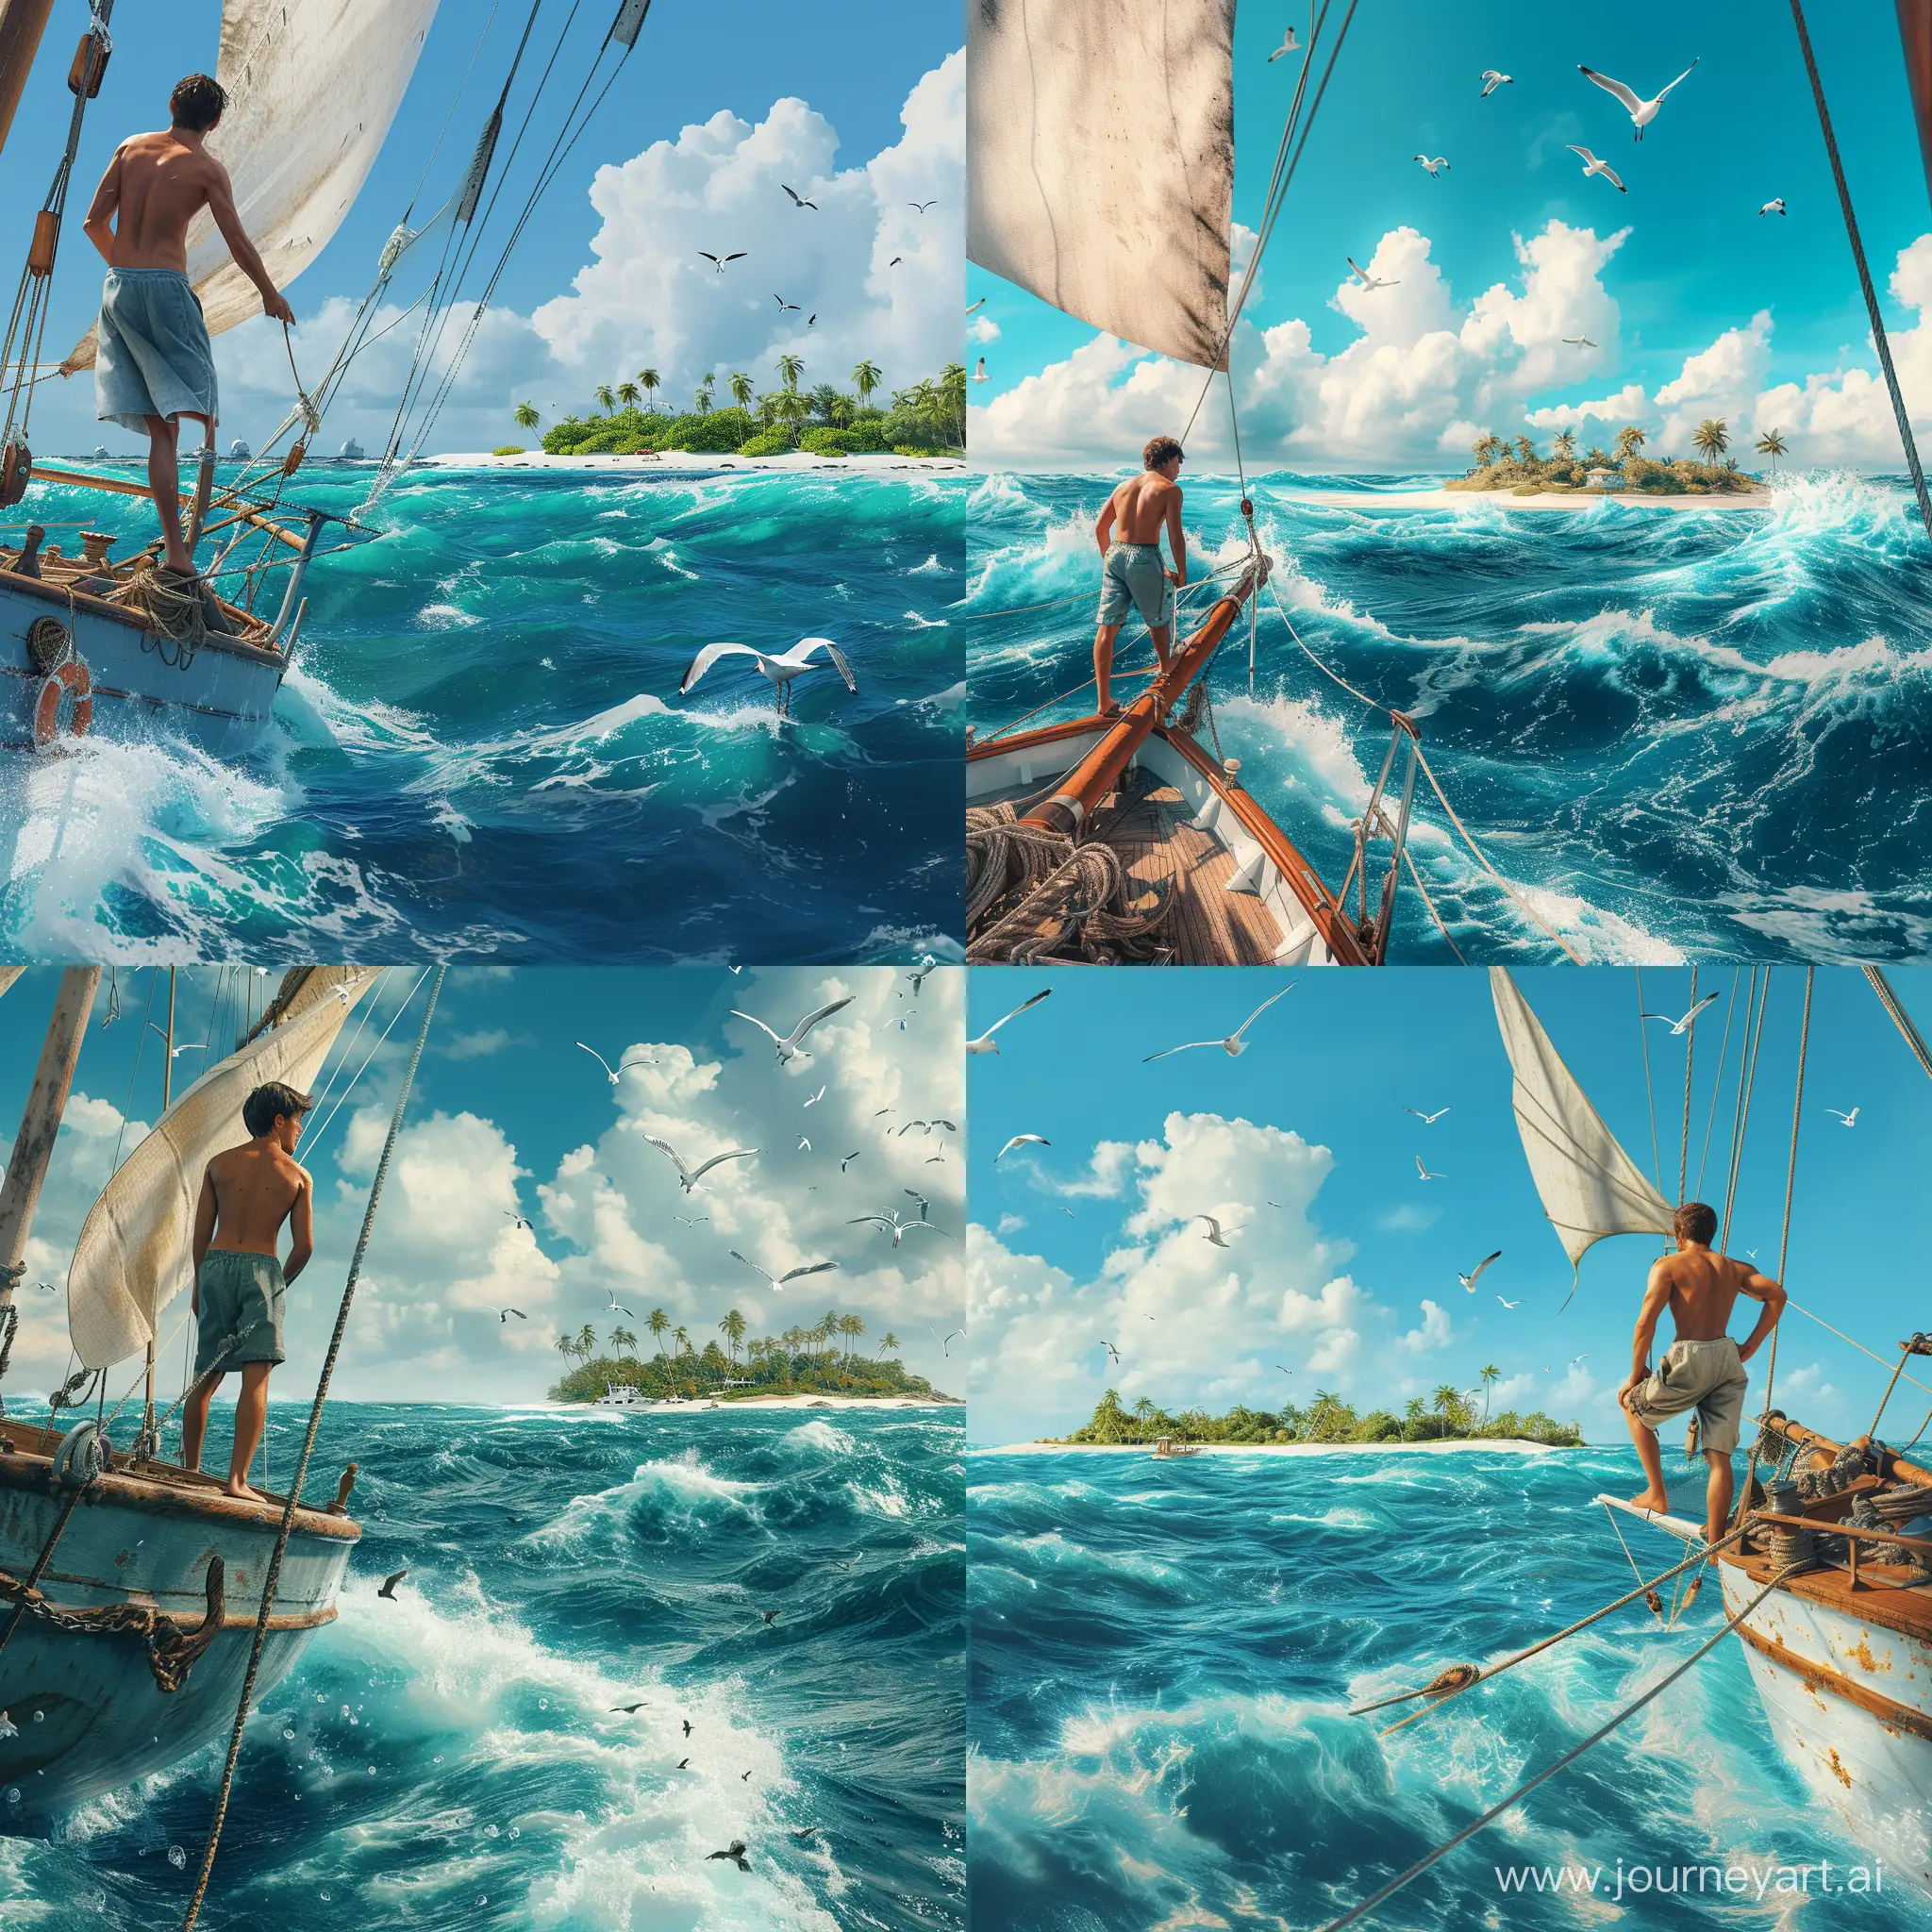 RAW photography, full frame, a man in shorts on the bow of a schooner in the sea, azure waves of the sea, an island with palm trees and a white sandy beach in the distance, seagulls in the sky, a beautiful view, voluminous light, aesthetic, masterpiece, realistic rendering, high detail ,deep rendering of the background, hyperrealistic, photorealistic 